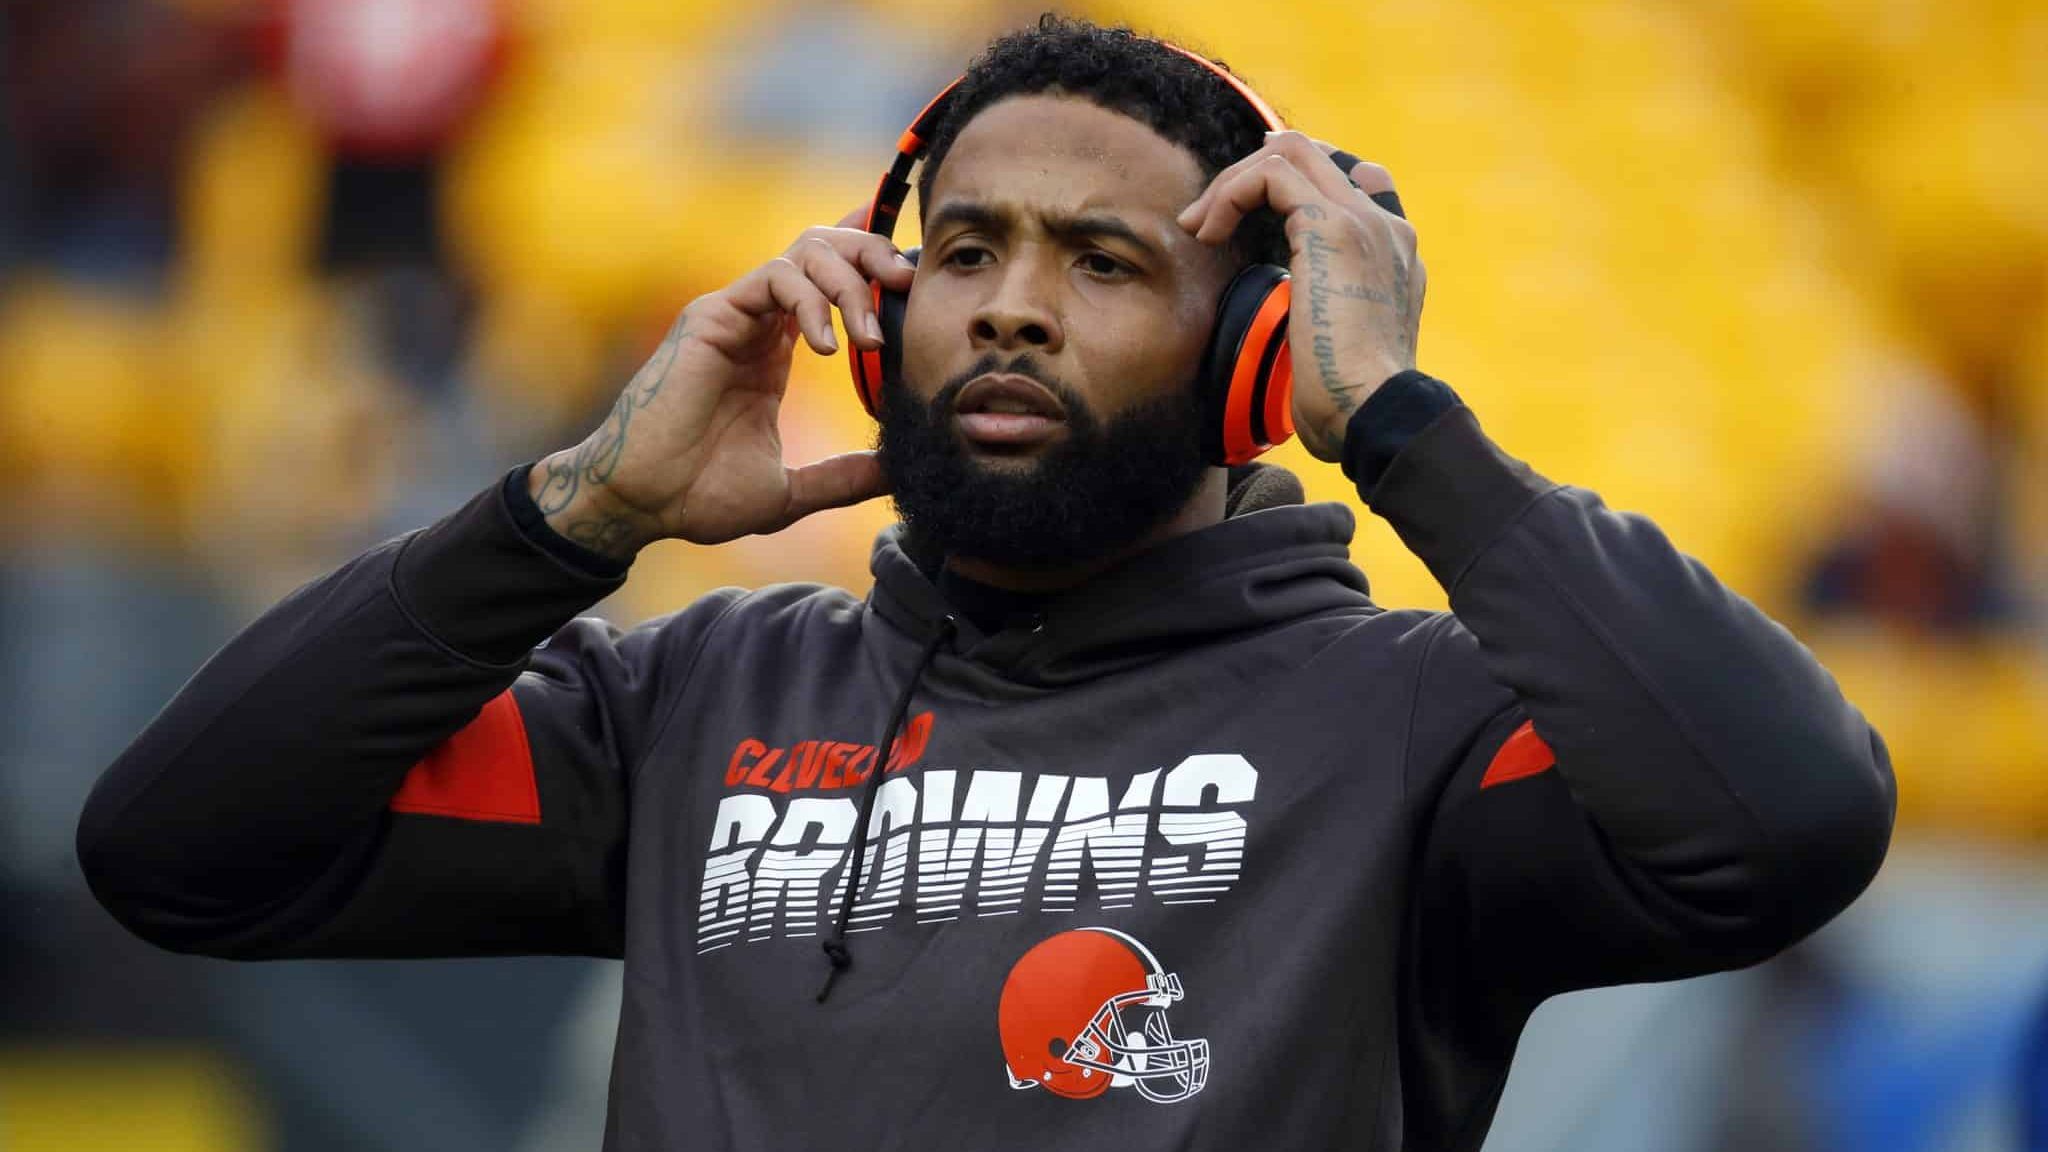 PITTSBURGH, PA - DECEMBER 01: Odell Beckham #13 of the Cleveland Browns warms up before the game against the Pittsburgh Steelers on December 1, 2019 at Heinz Field in Pittsburgh, Pennsylvania.